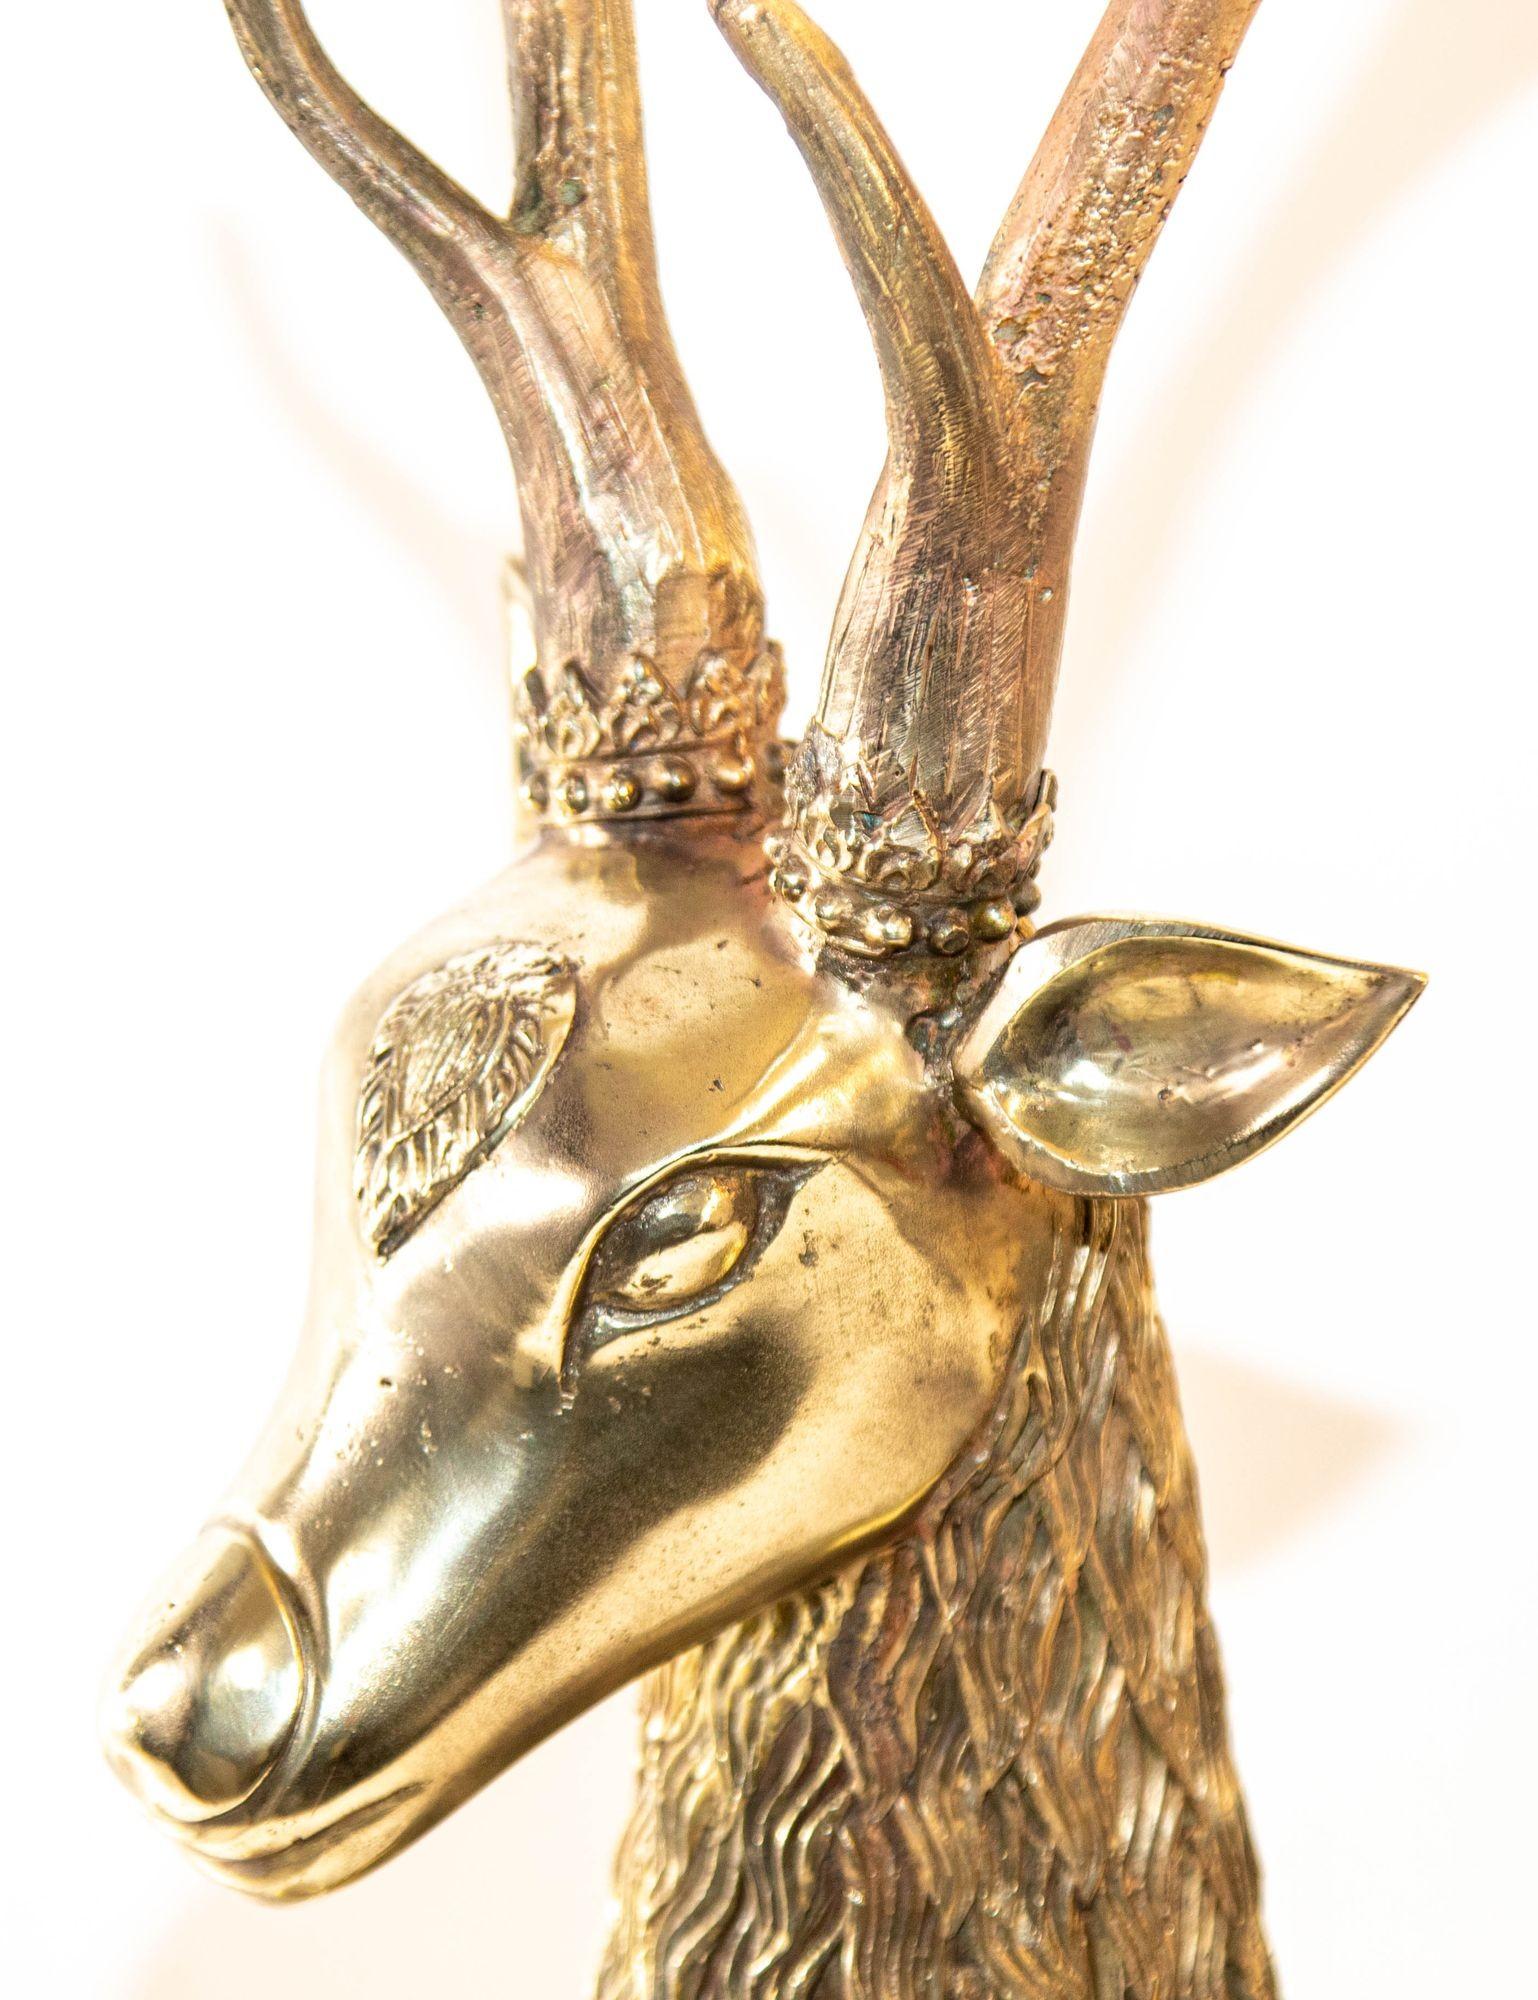 Vintage dramatic and large seated 1960s brass deer with fanciful decoration attributed to Sarreid Ltd.
Large heavy cast brass reclining stag sculpture in solid brass design polished gold color.
Hollywood Regency Large Brass Deer attributed to